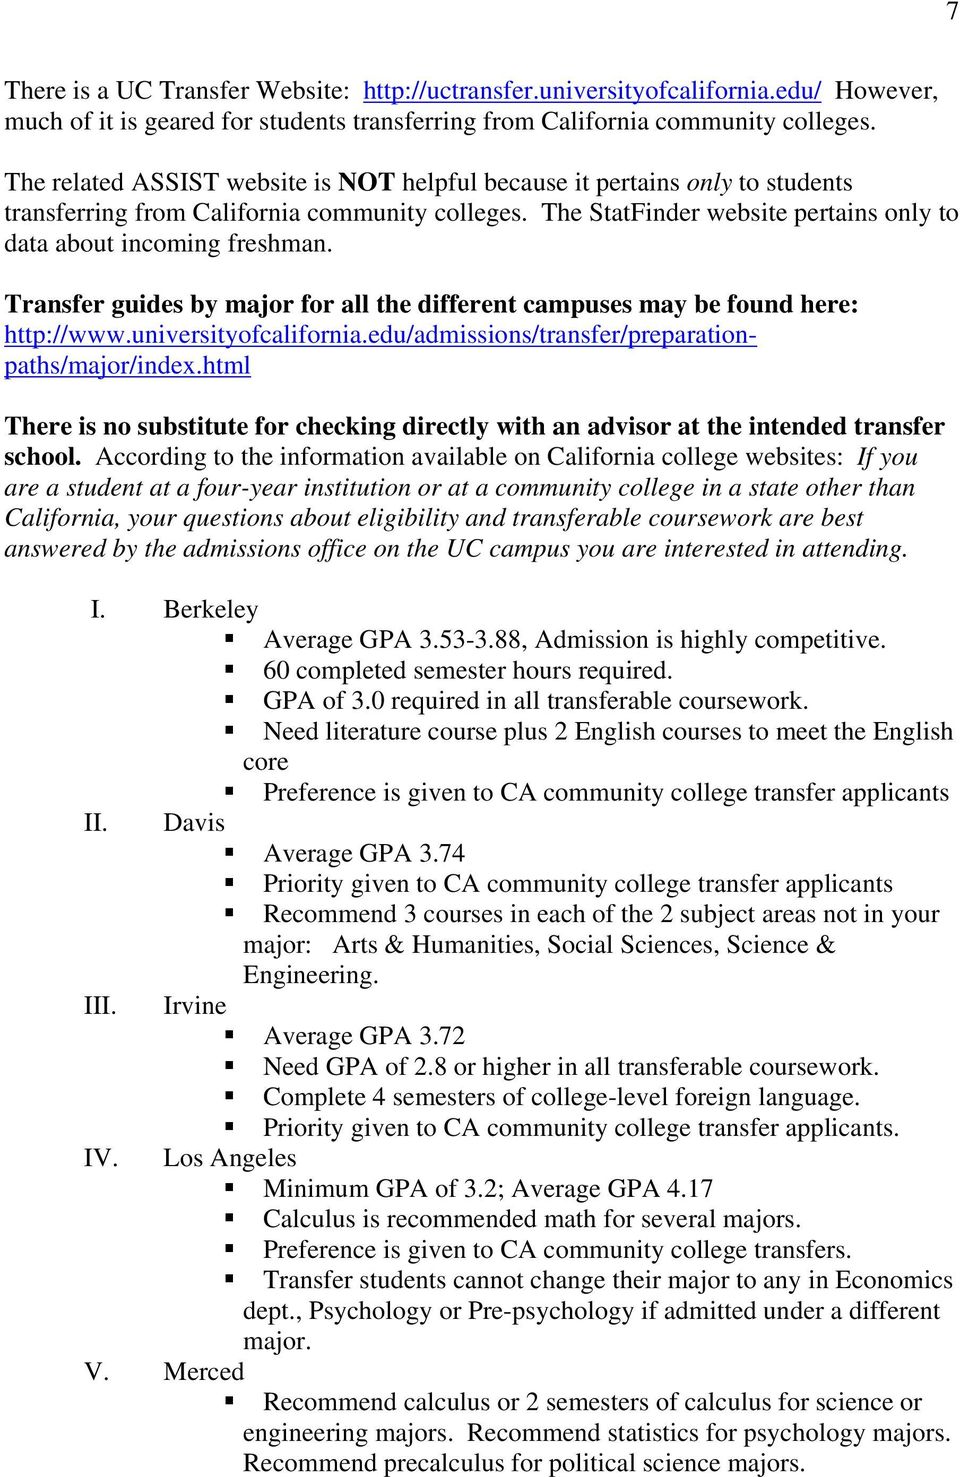 Transfer guides by major for all the different campuses may be found here: http://www.universityofcalifornia.edu/admissions/transfer/preparationpaths/major/index.